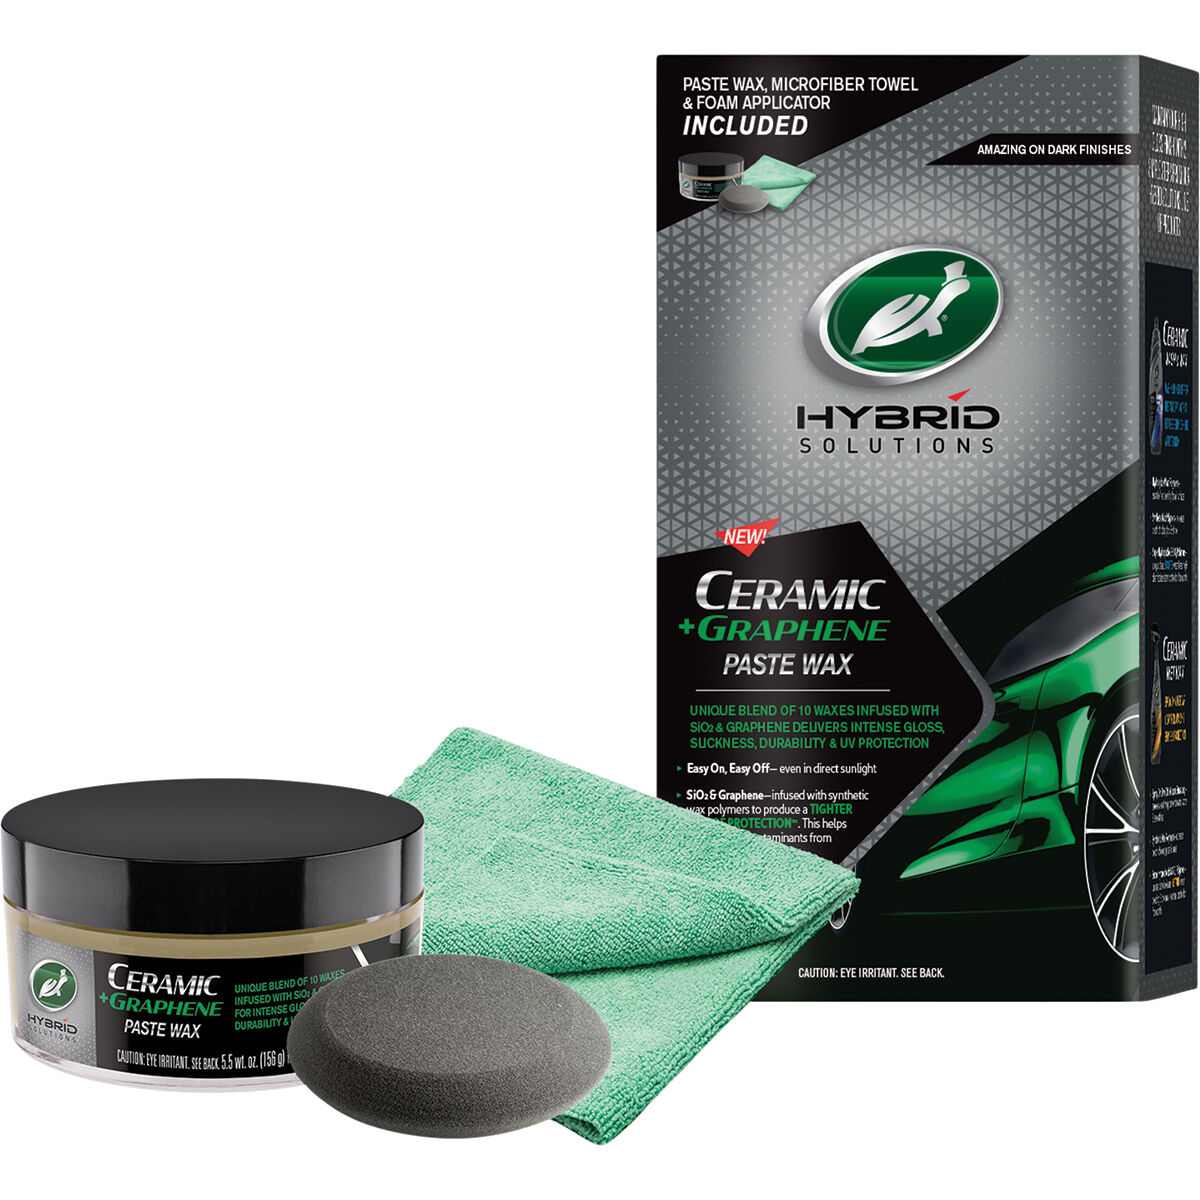 Factor 4® - 3 Year Synthetic Wax Kit